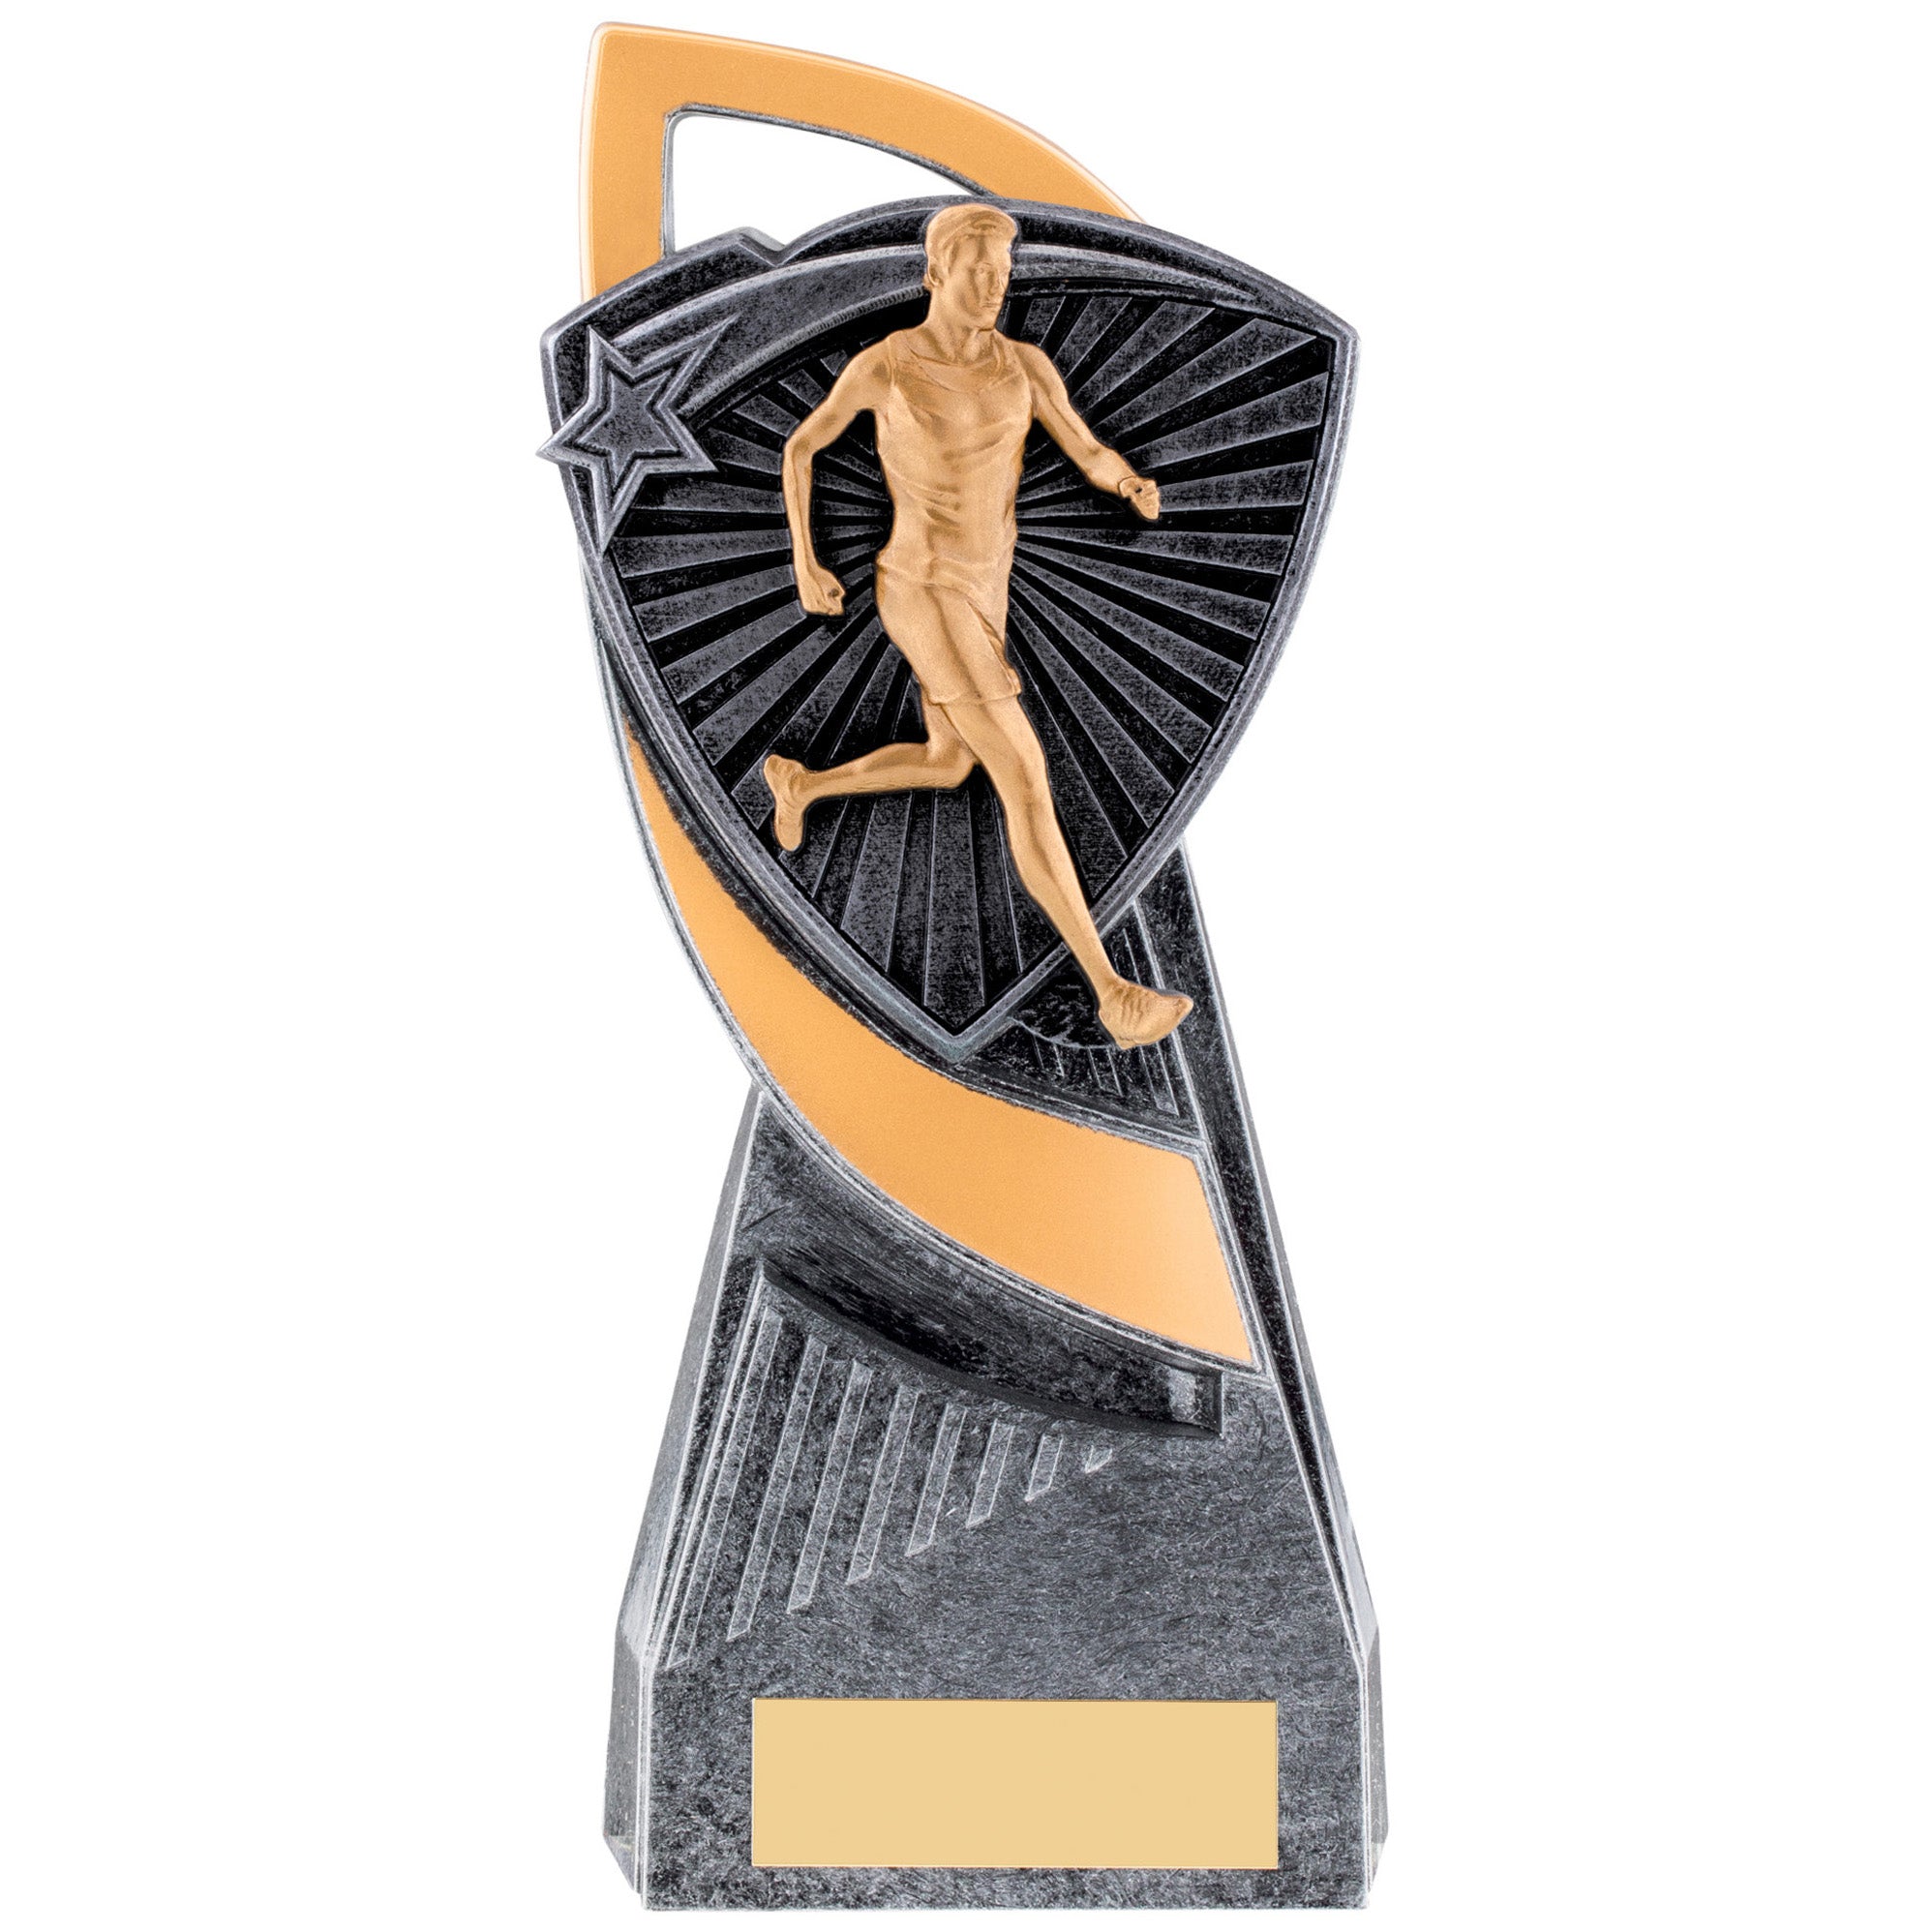 Utopia Male Running Trophy (Gold/Silver)